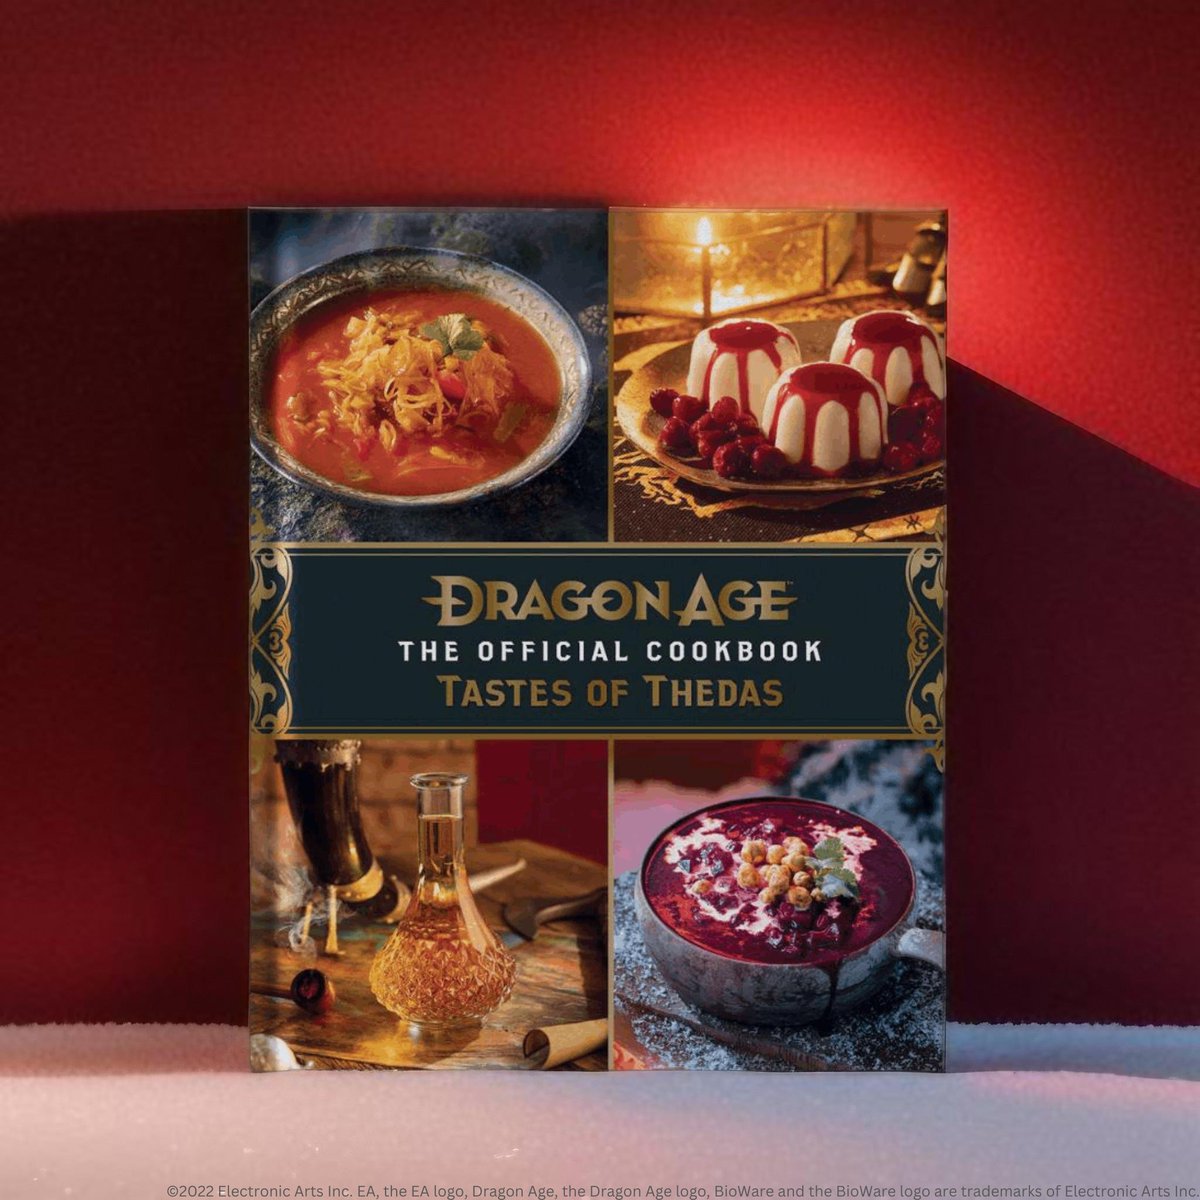 🐉Delve into the heart of Thedas on Dragon Age Day! To celebrate, we're giving away 🔥FIVE copies of the official Dragon Age cookbook, a culinary treasure filled with recipes inspired by the lands we love. The book captures the essence of Ferelden, Orlais, and other Dragon Age…